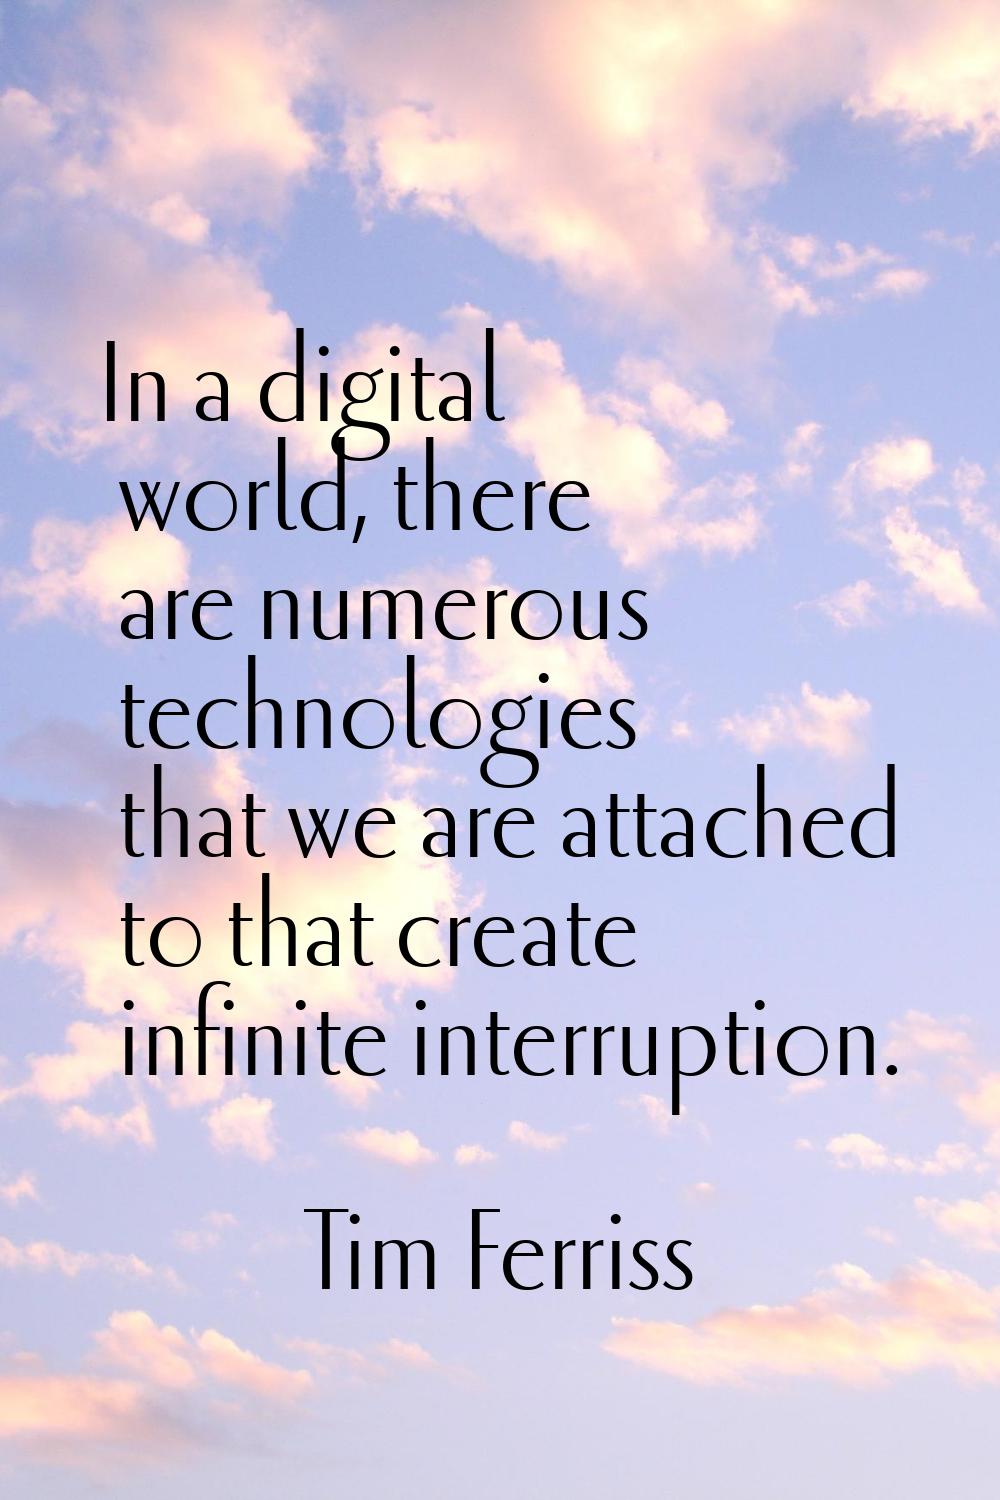 In a digital world, there are numerous technologies that we are attached to that create infinite in